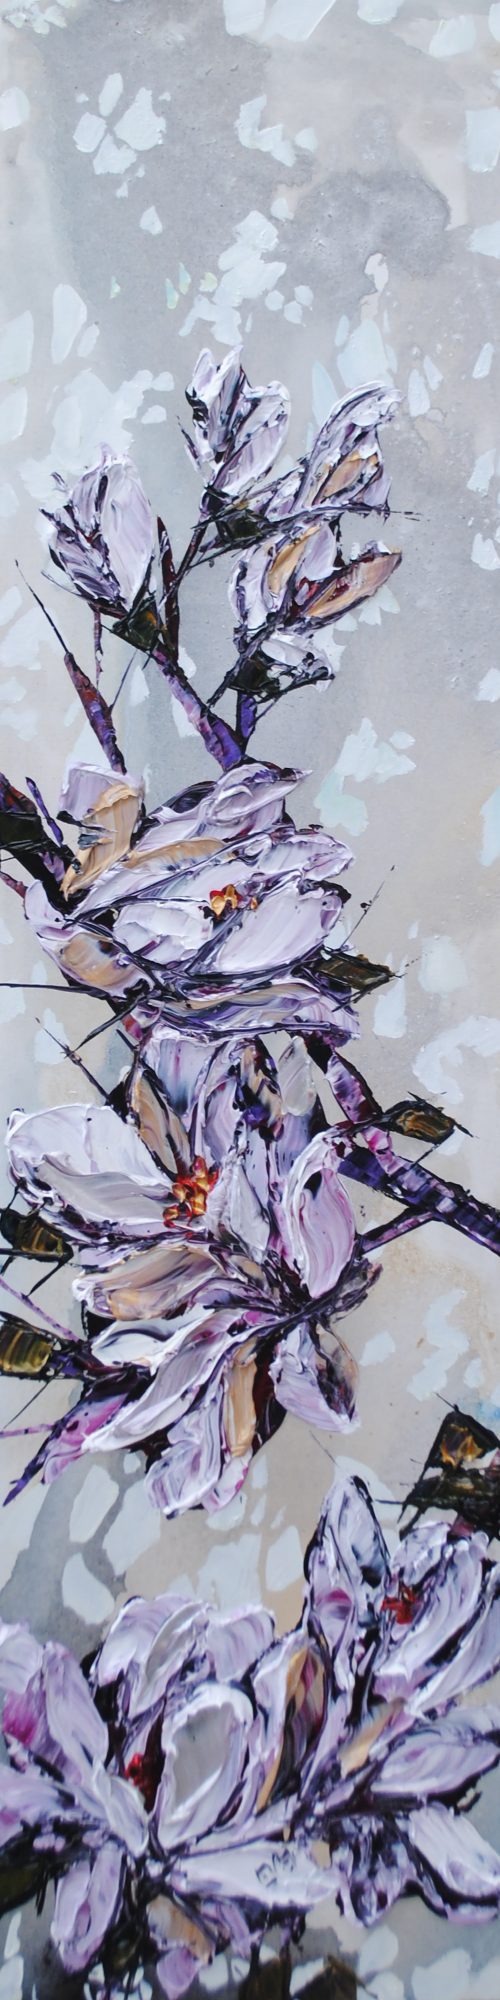 Floral (magnolia Blossoms) by Maya Eventov